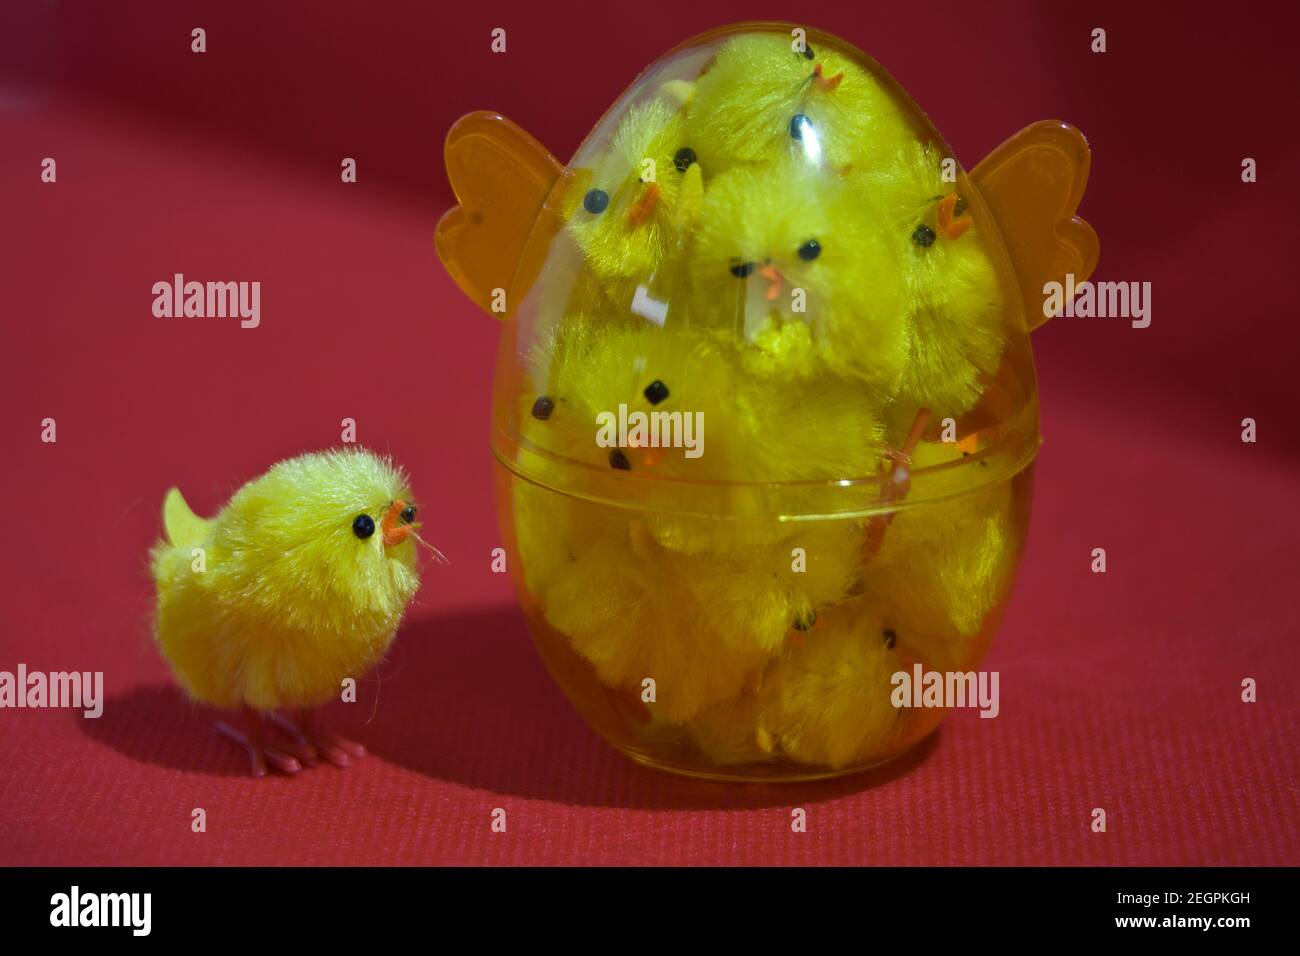 peeps, chicks, fuzzy, chickens, hens, Easter,  kids, decorations, basket fillers, festive, cute, stuffed, in egg, plastic, trapped, stuck inside, fun Stock Photo